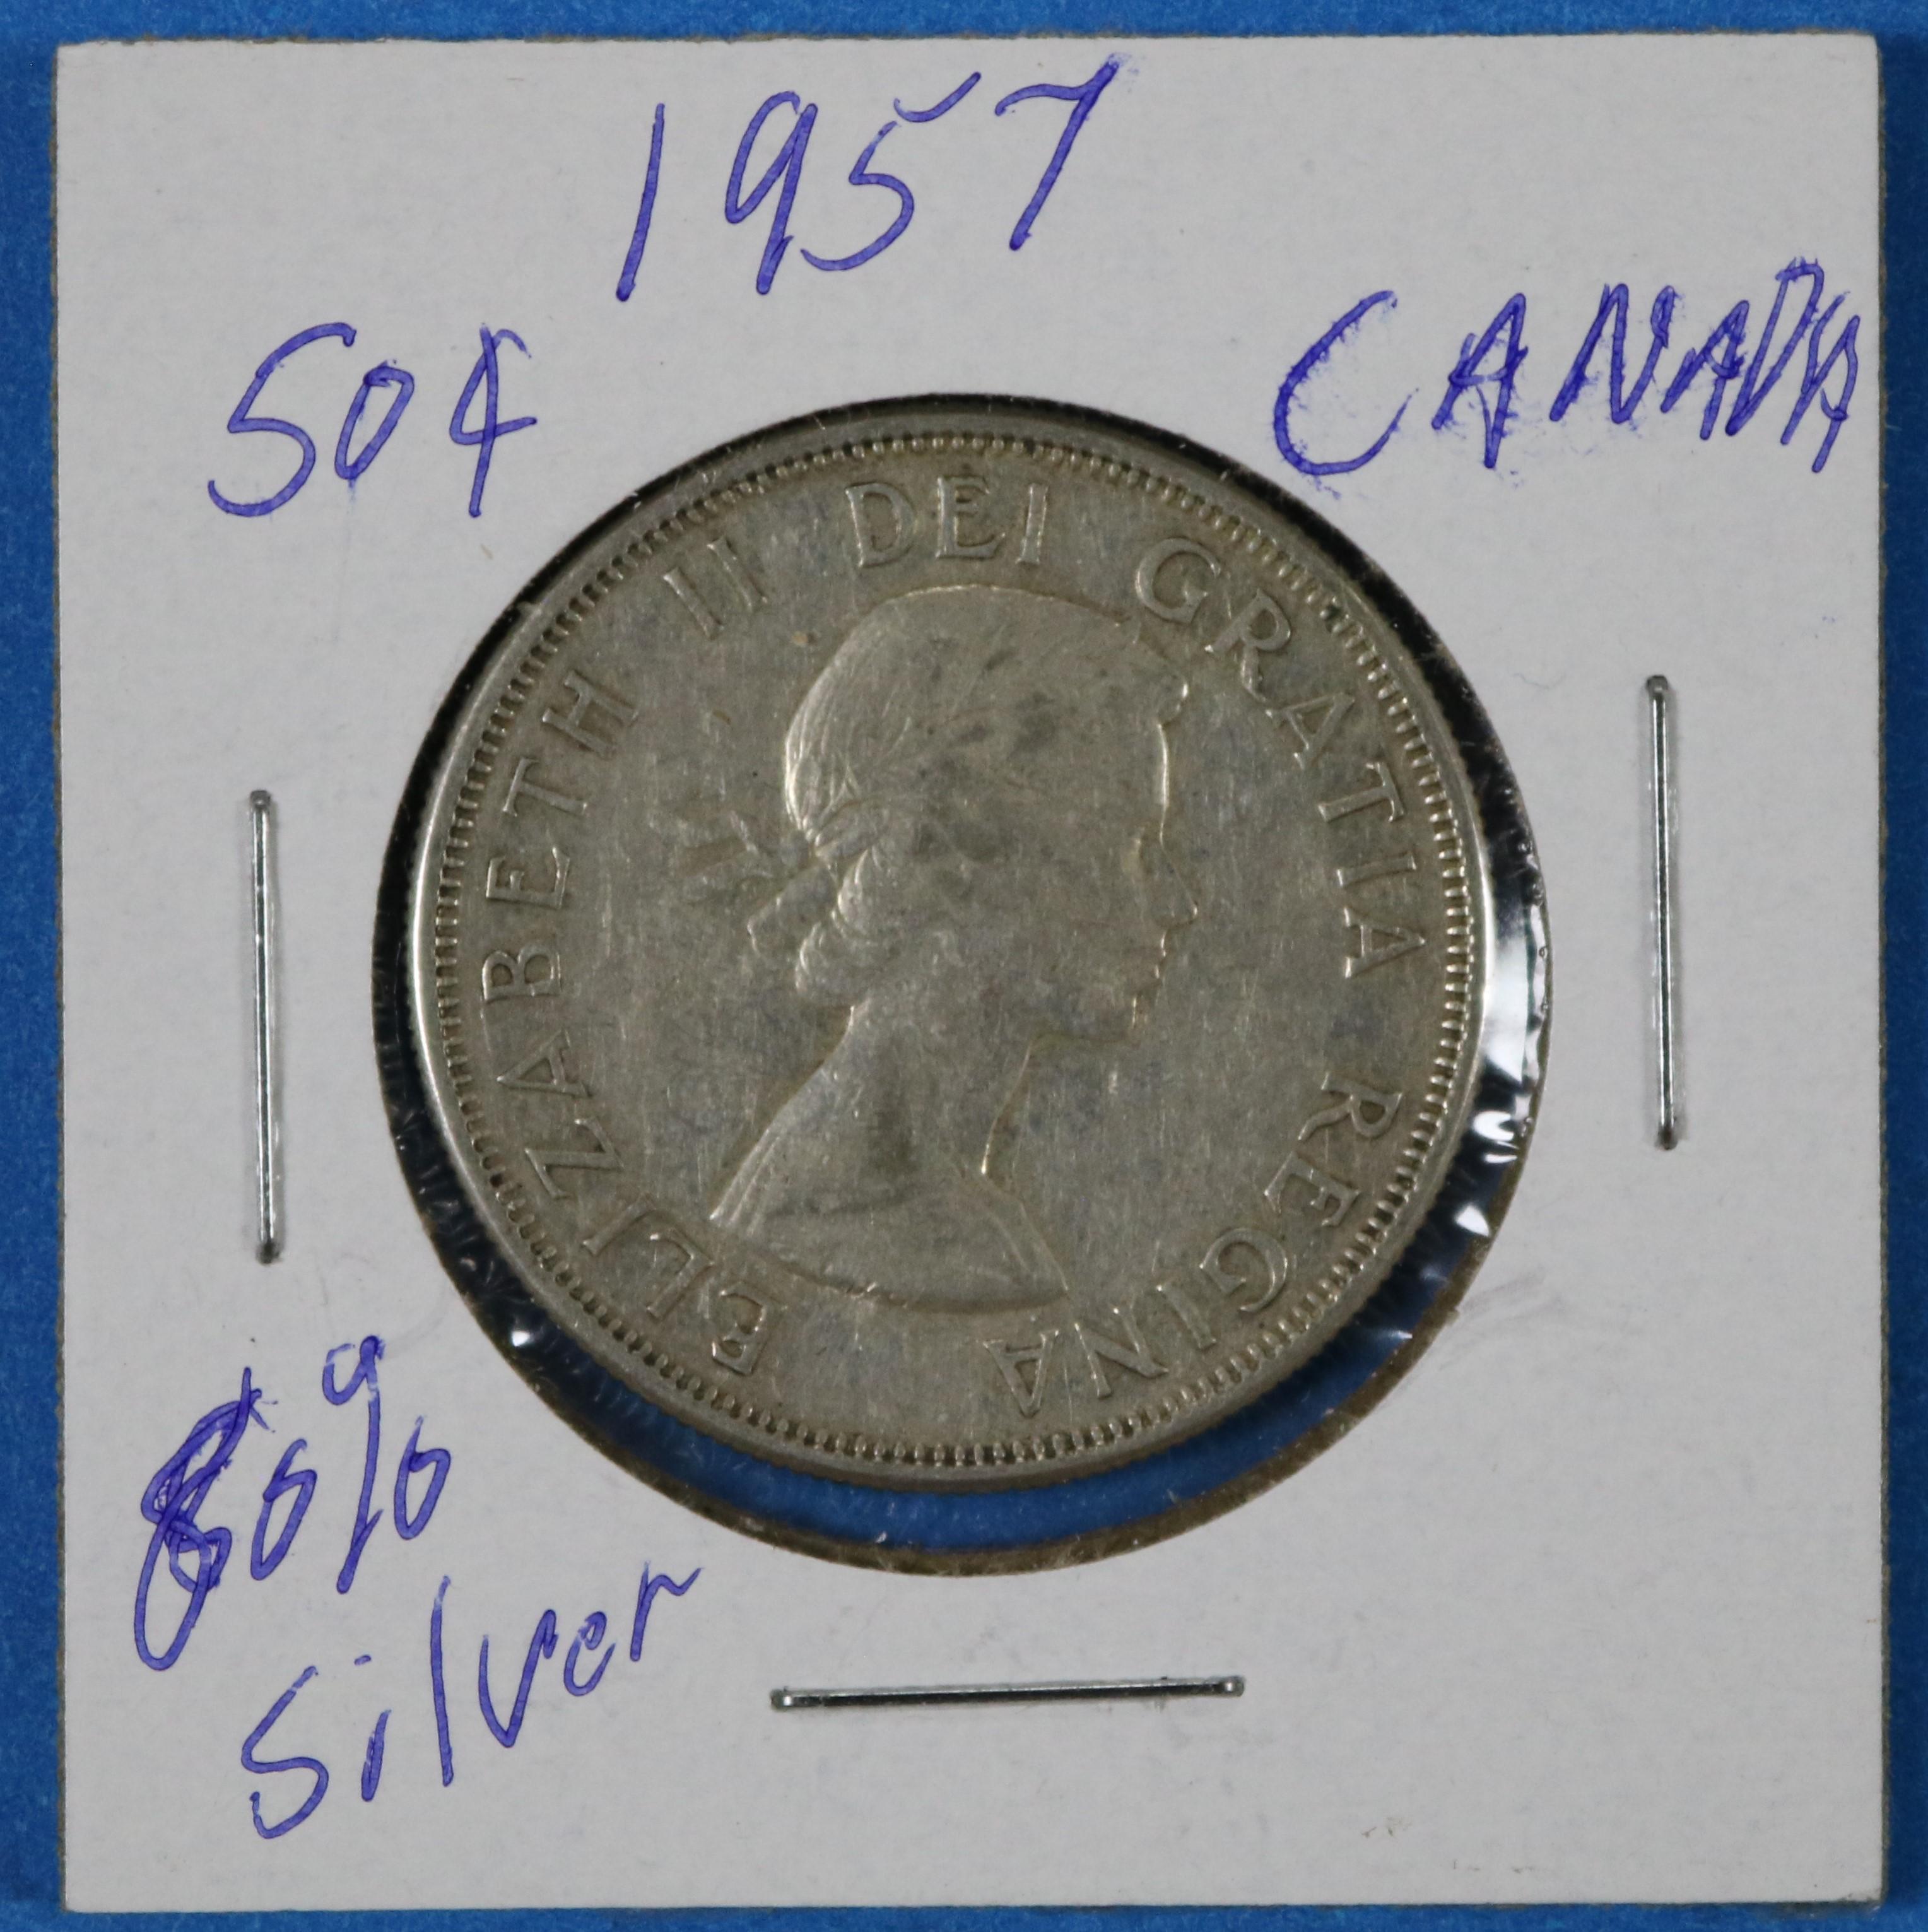 1957 Canadian Silver 50 Cents Coin